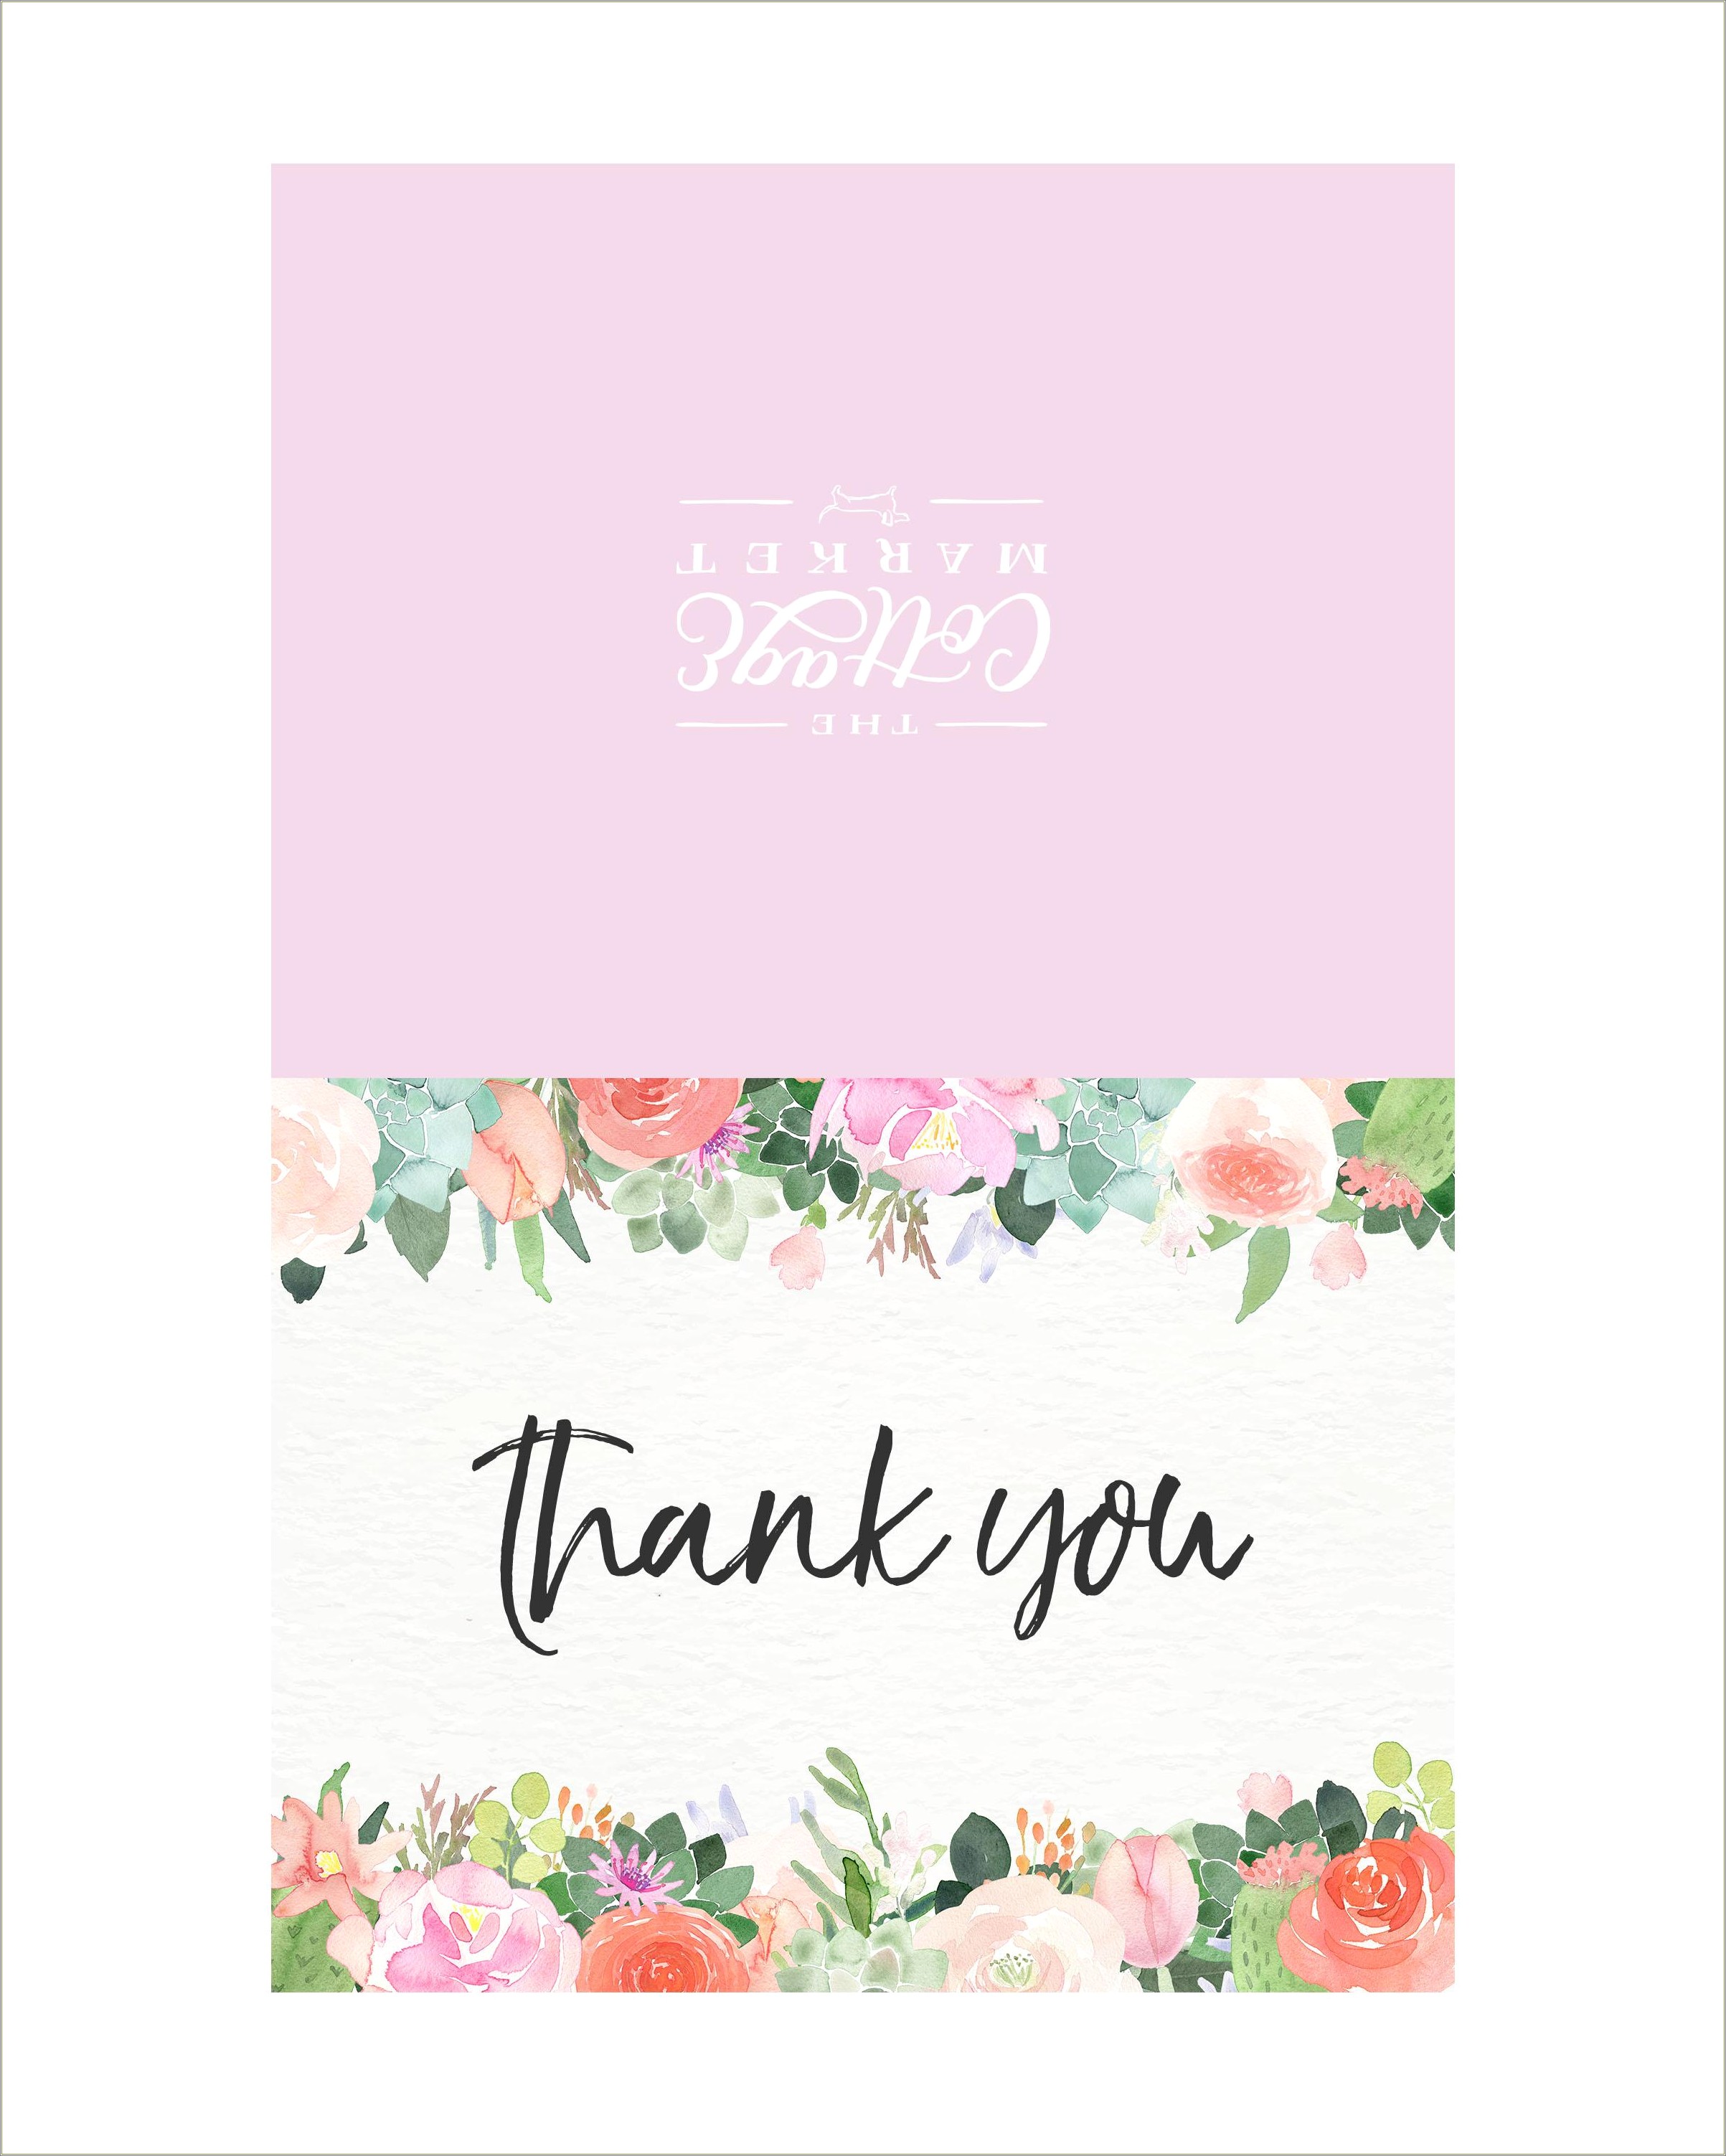 Free Printable Thank You Note Card Templates